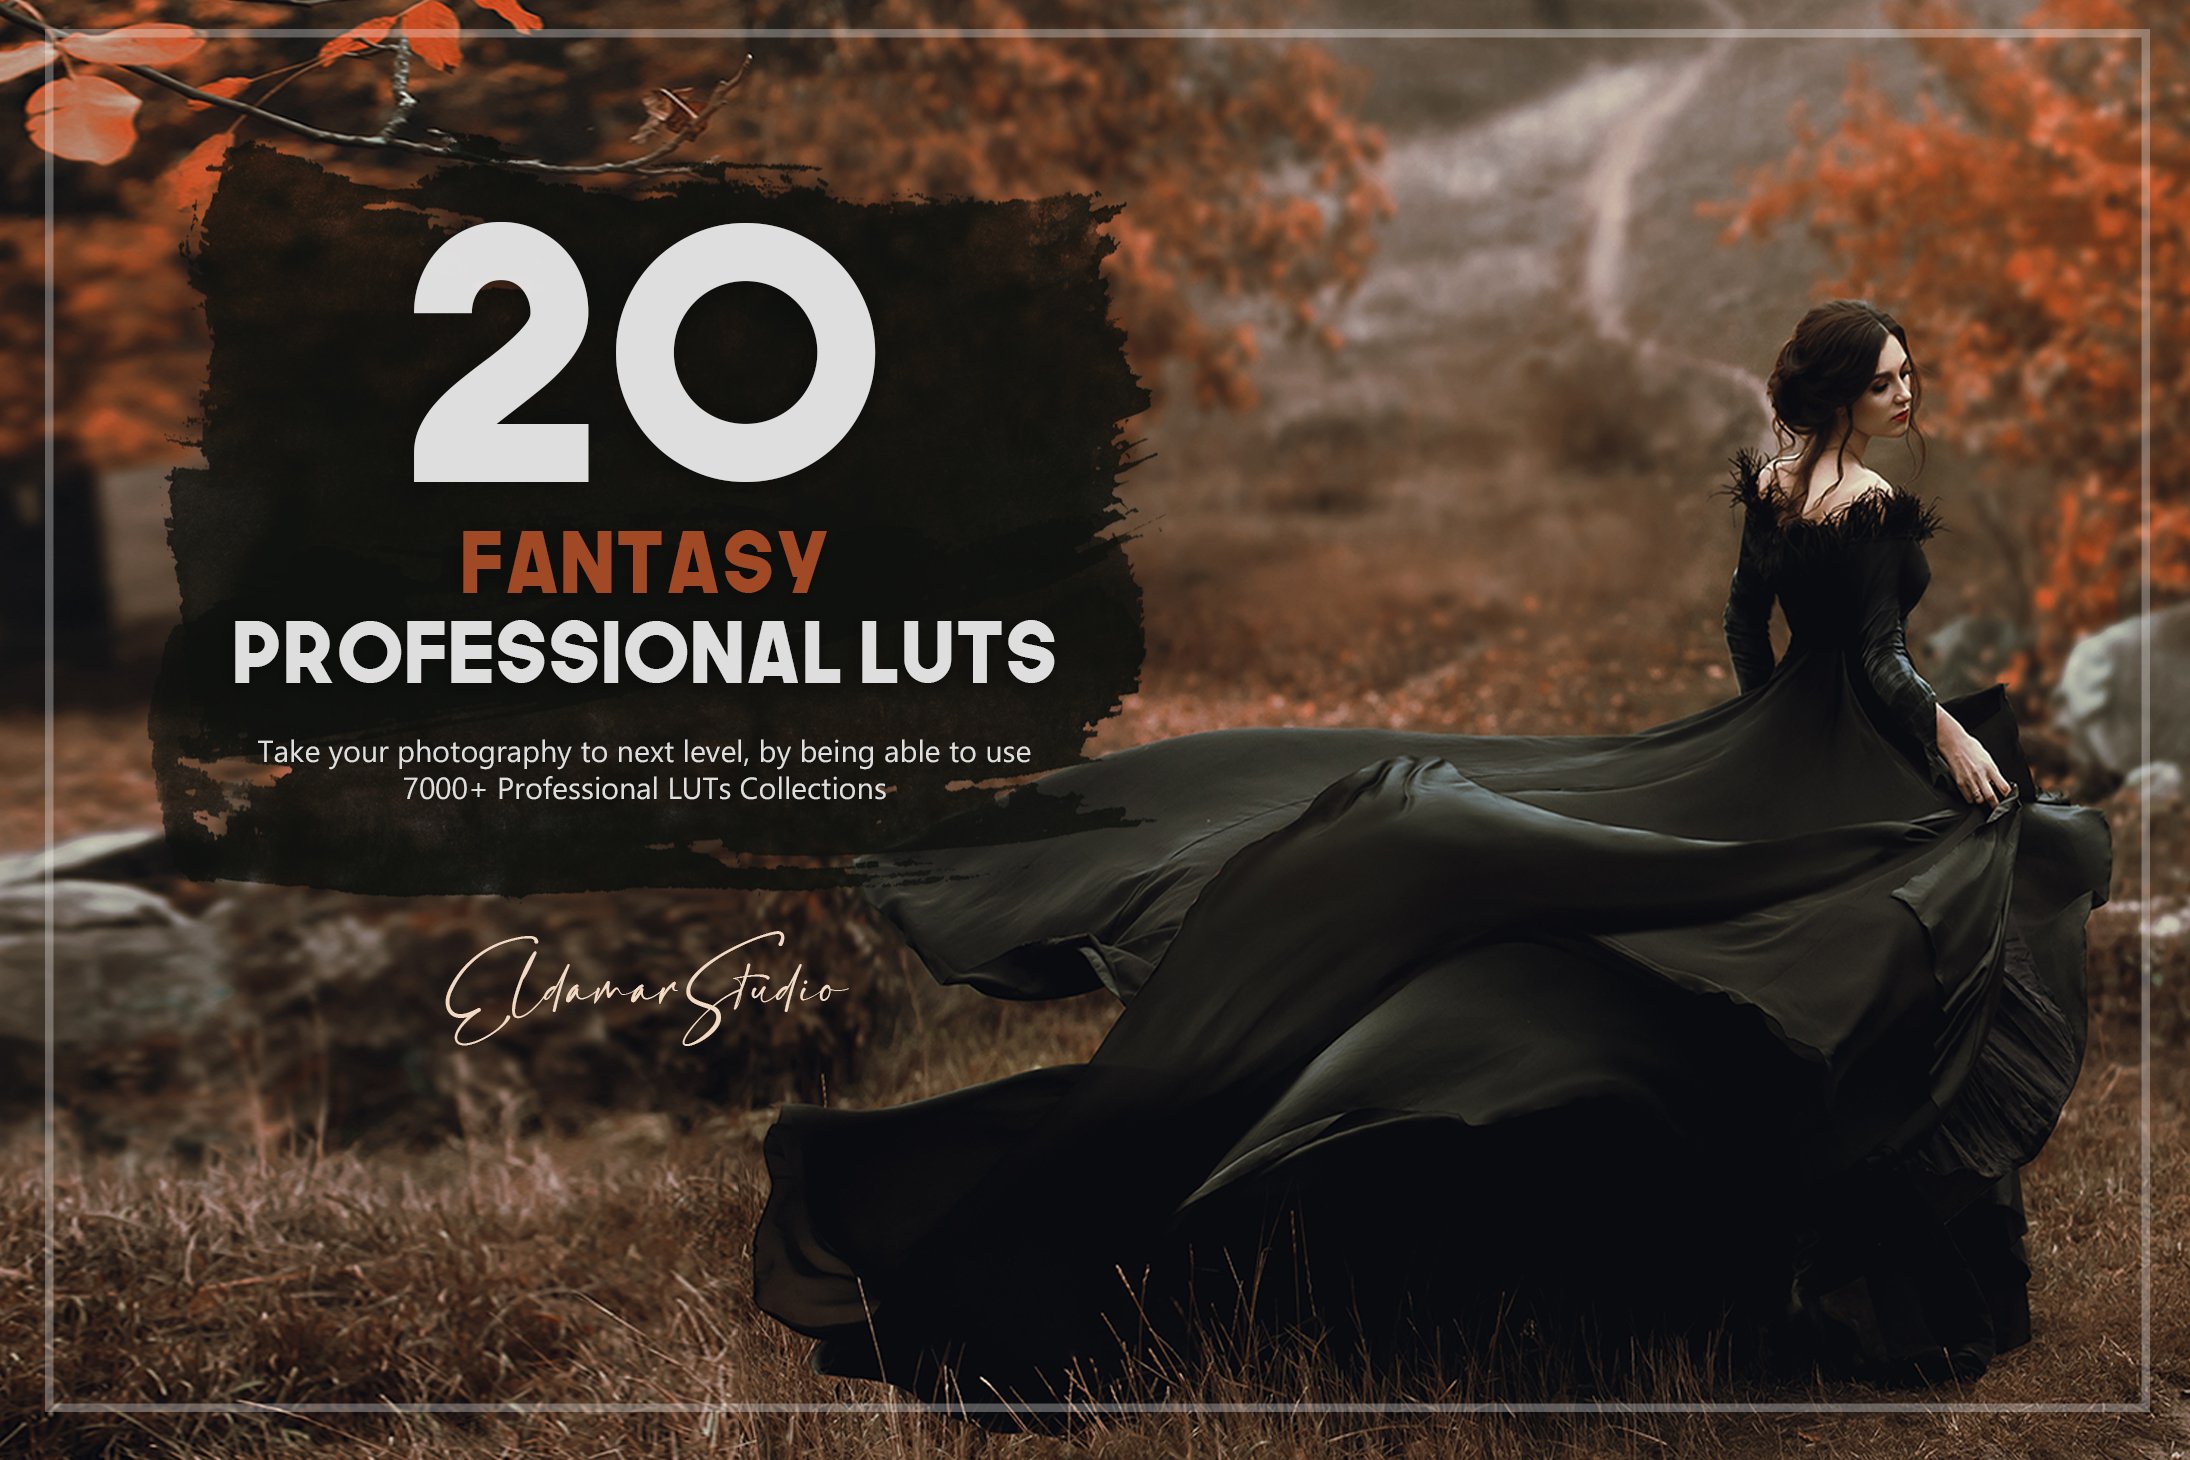 20 Fantasy LUTs Packcover image.